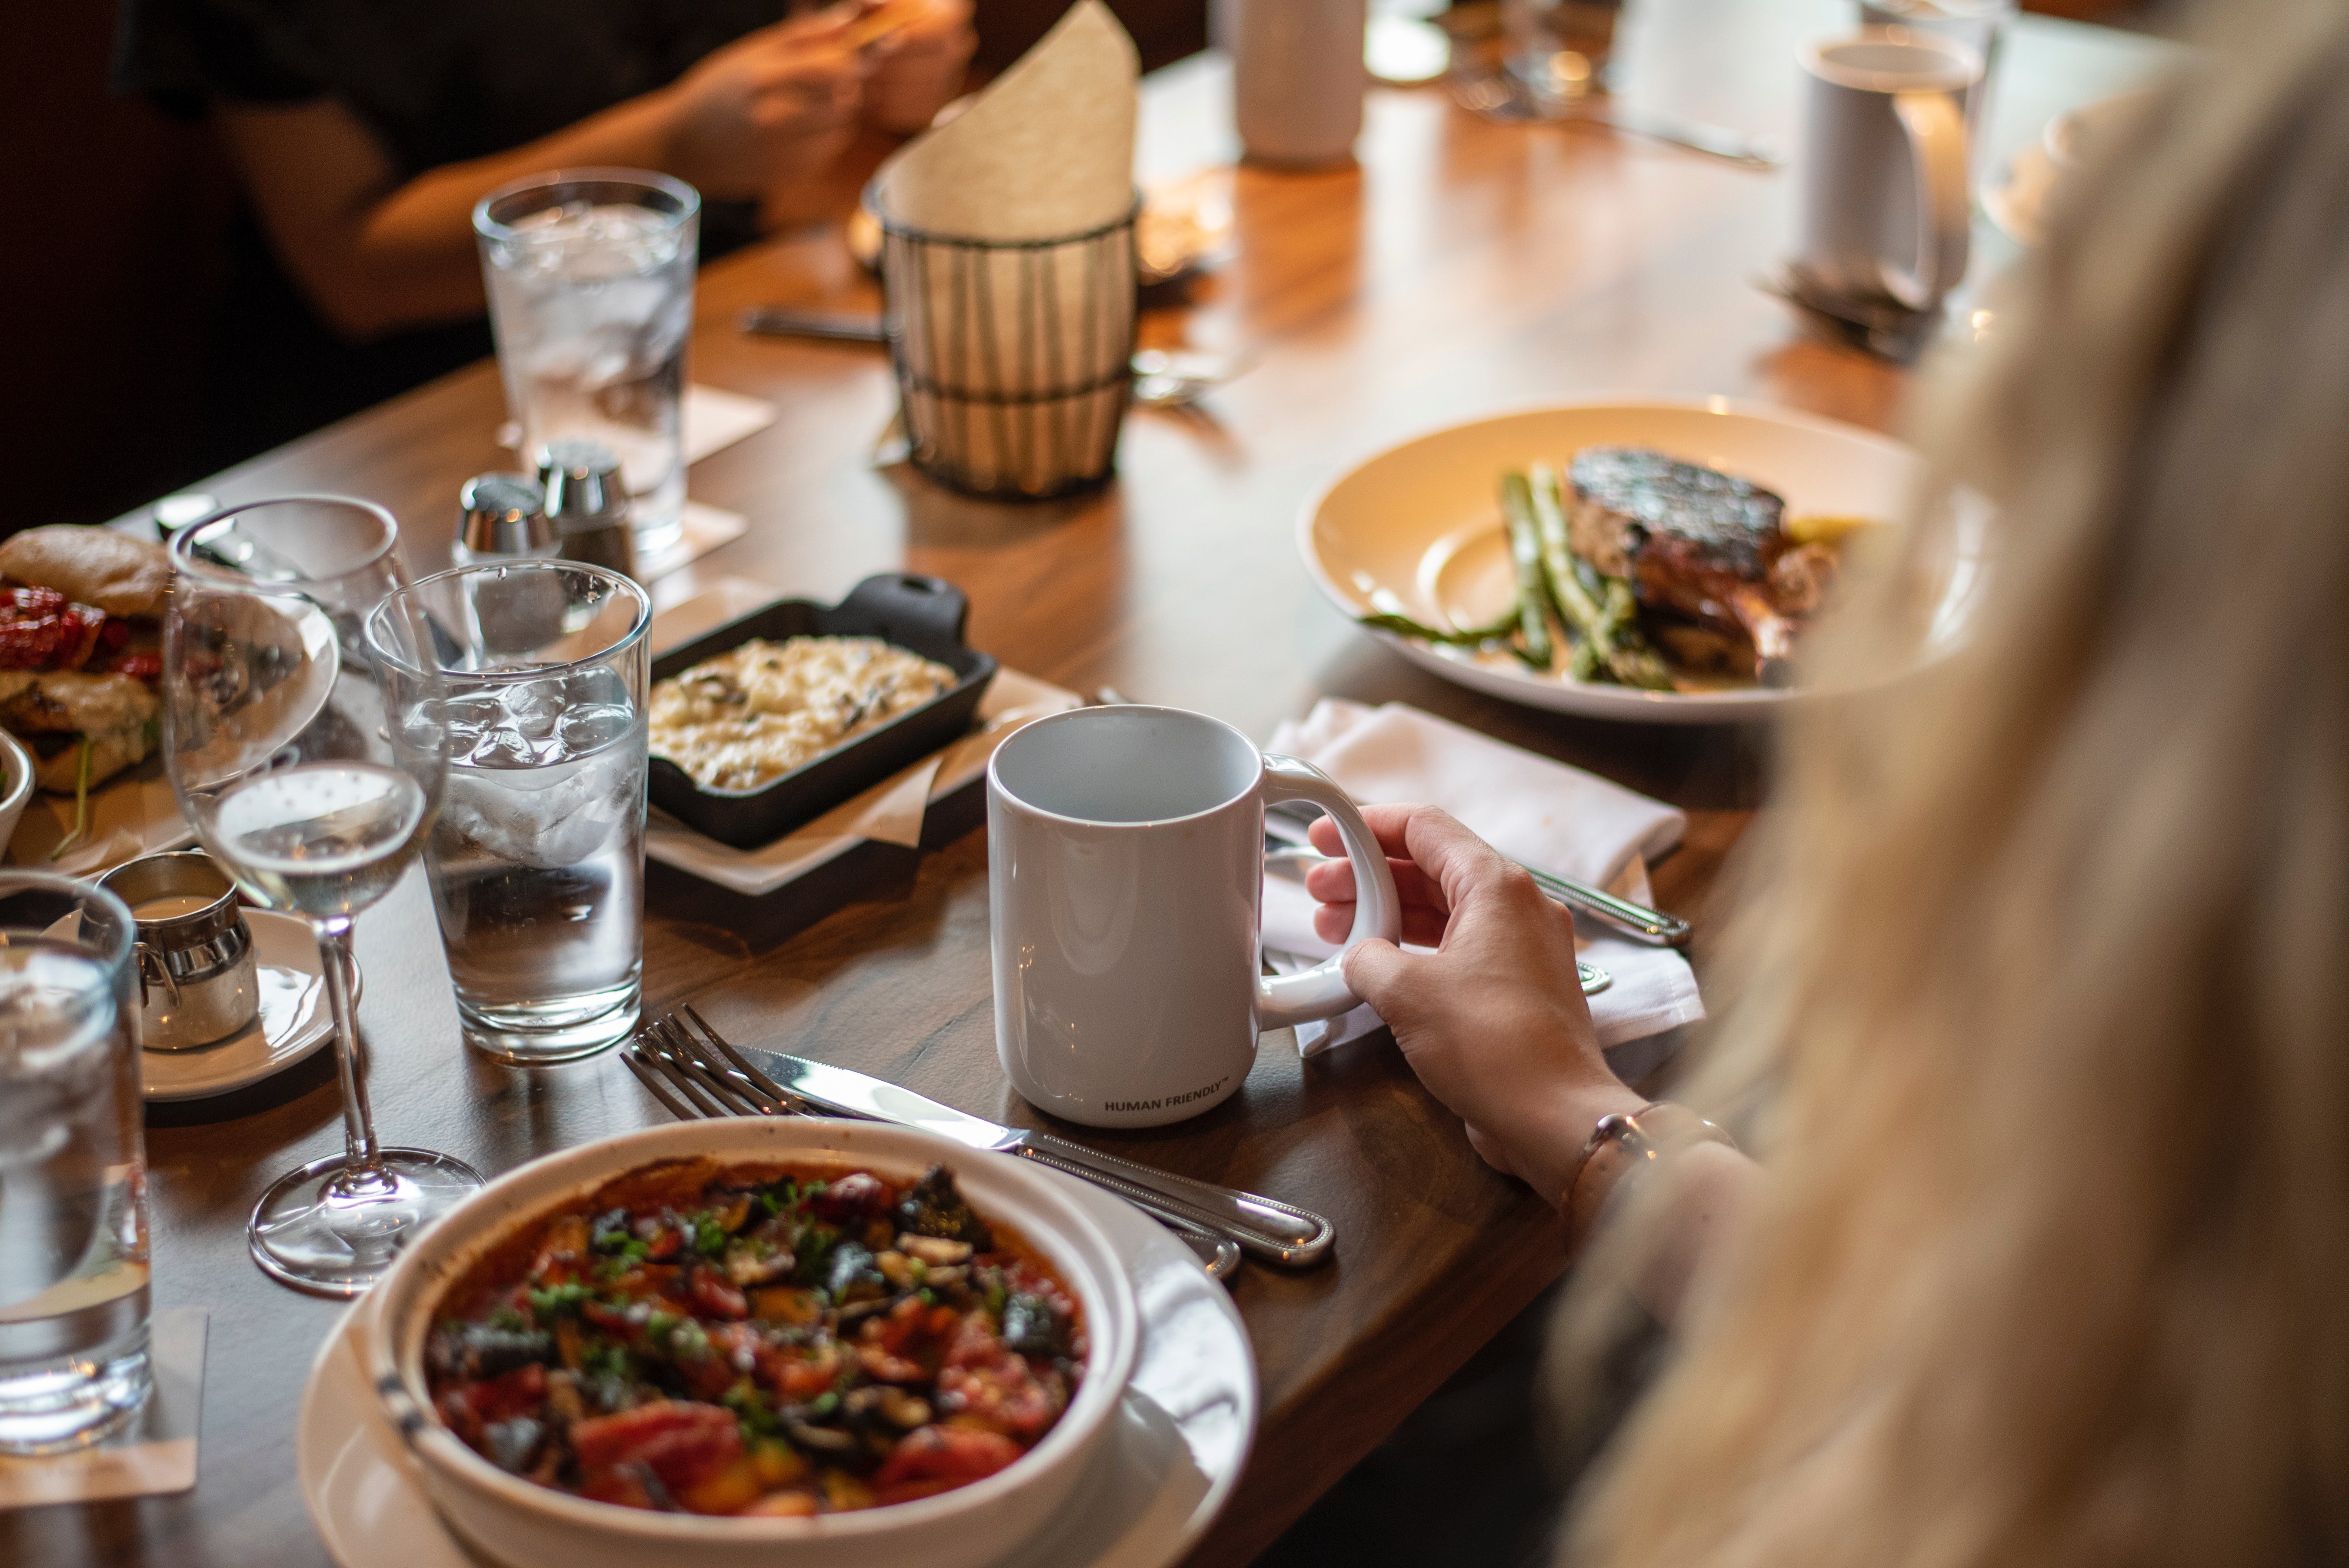 My mom forced me to accompany her to the restaurant | Photo: Unsplash